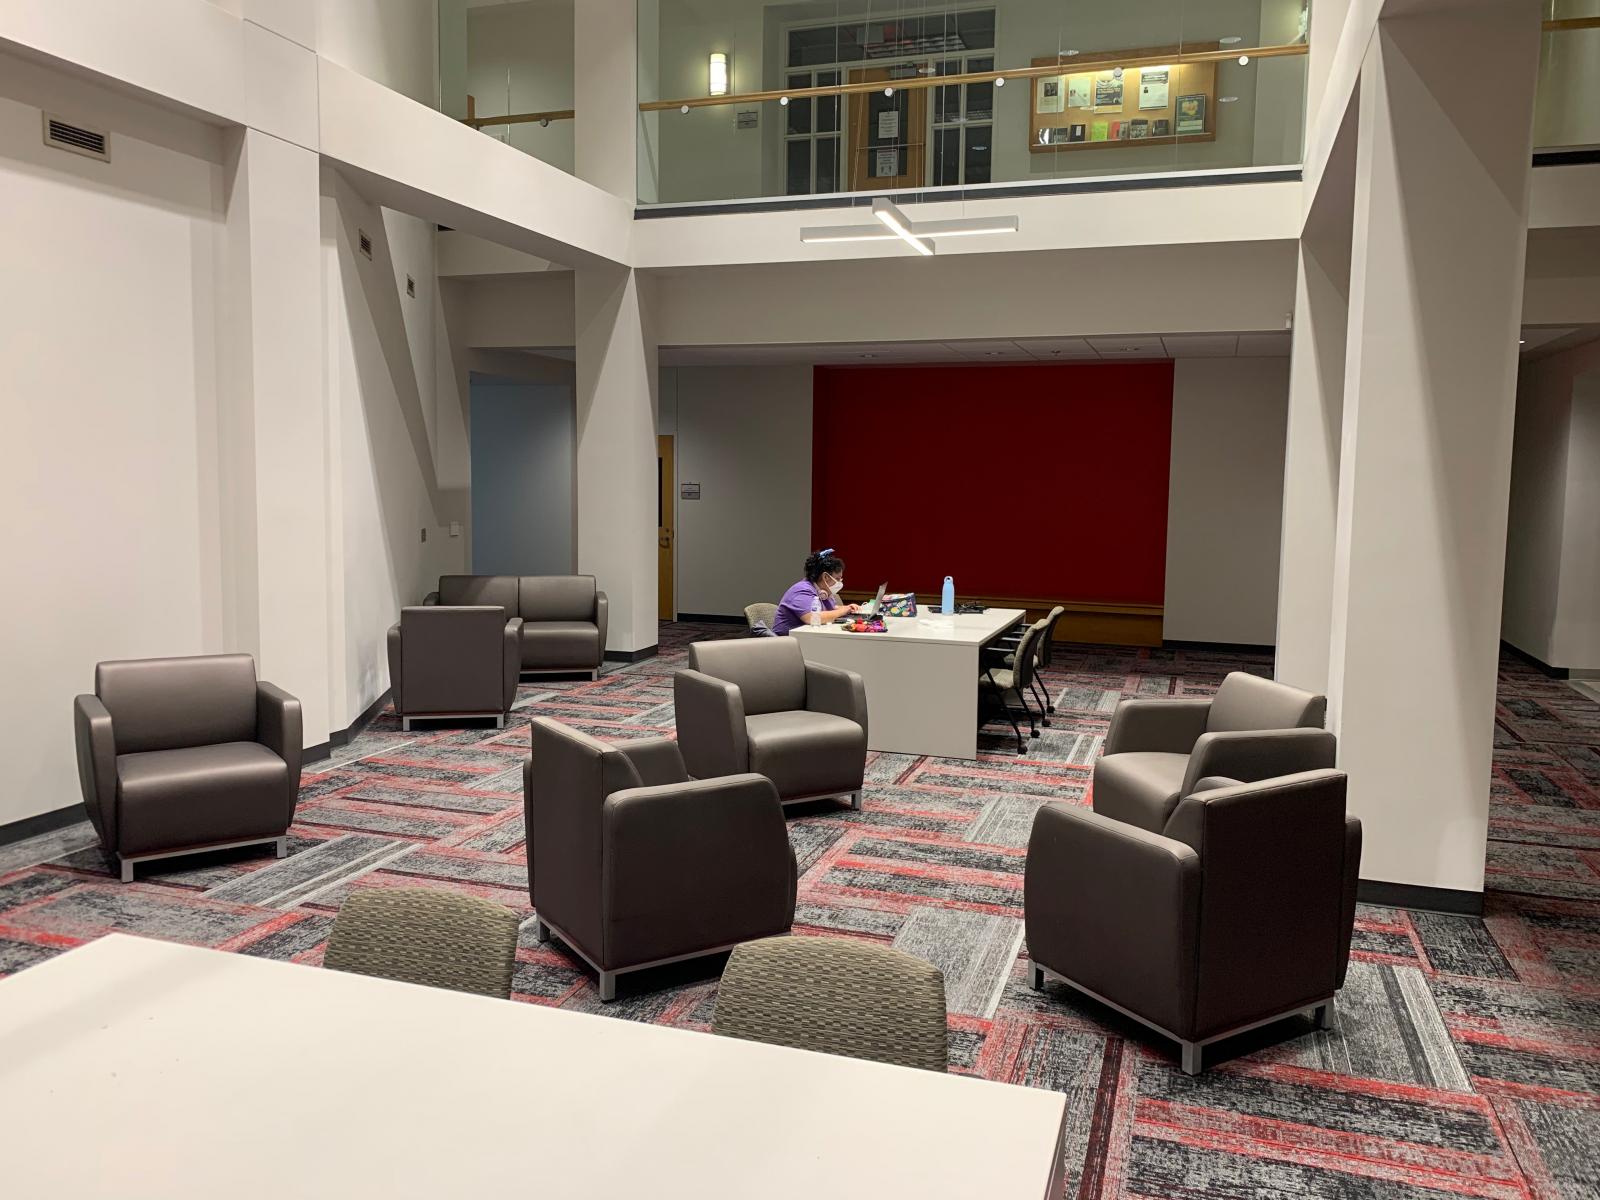 Louise Pound Hall, 2nd level study space and lounge.